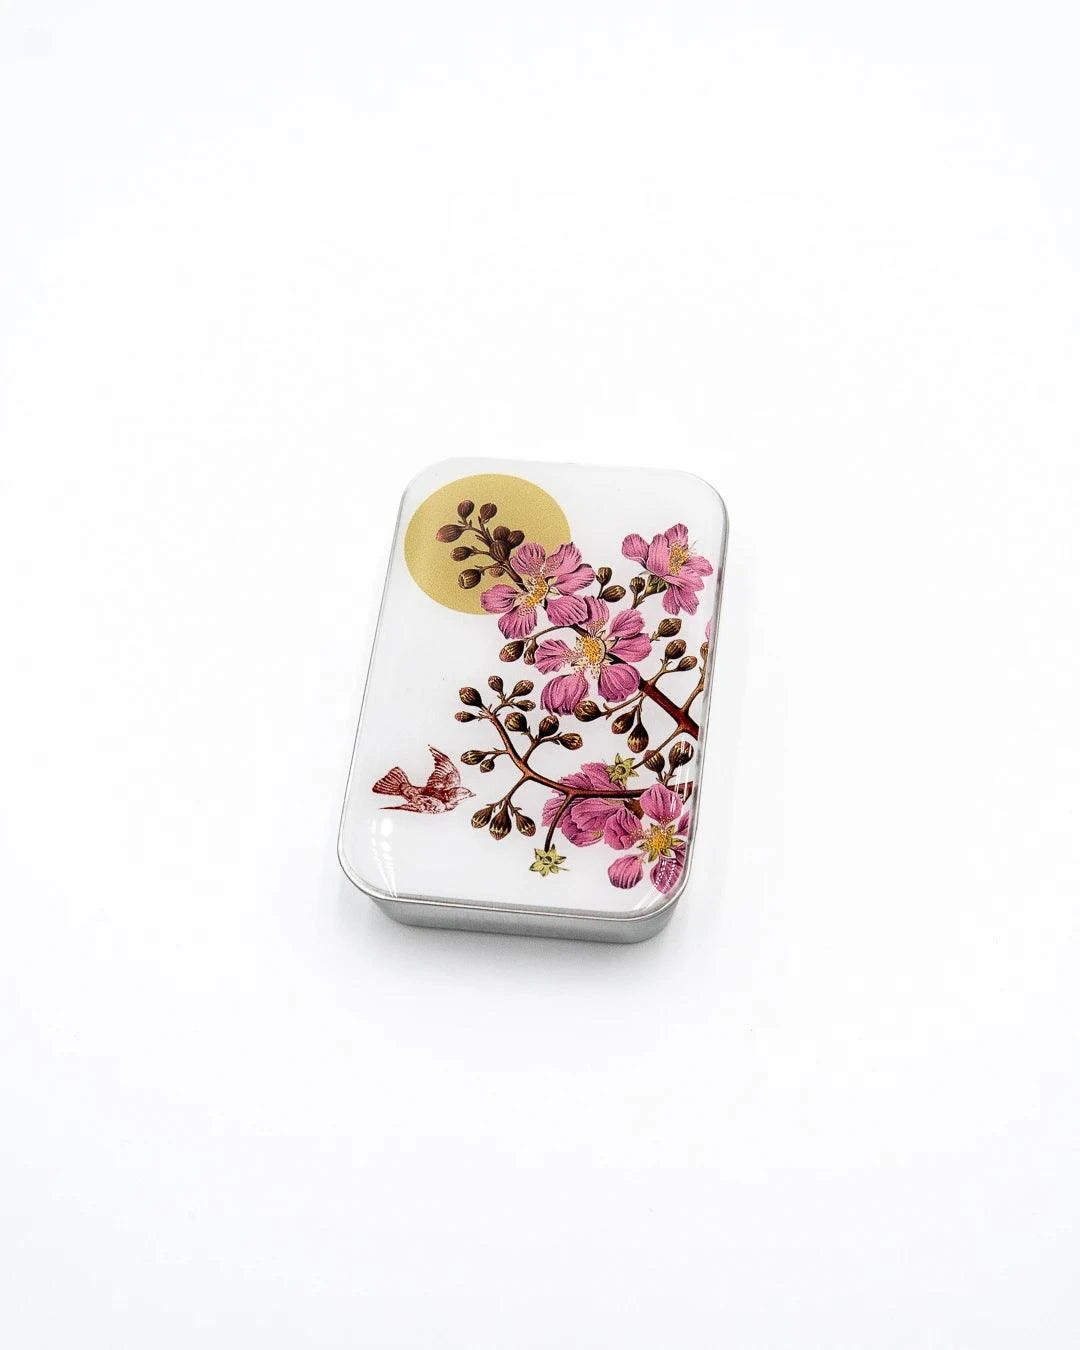 Cherry Blossom & Swallow Notions Tin